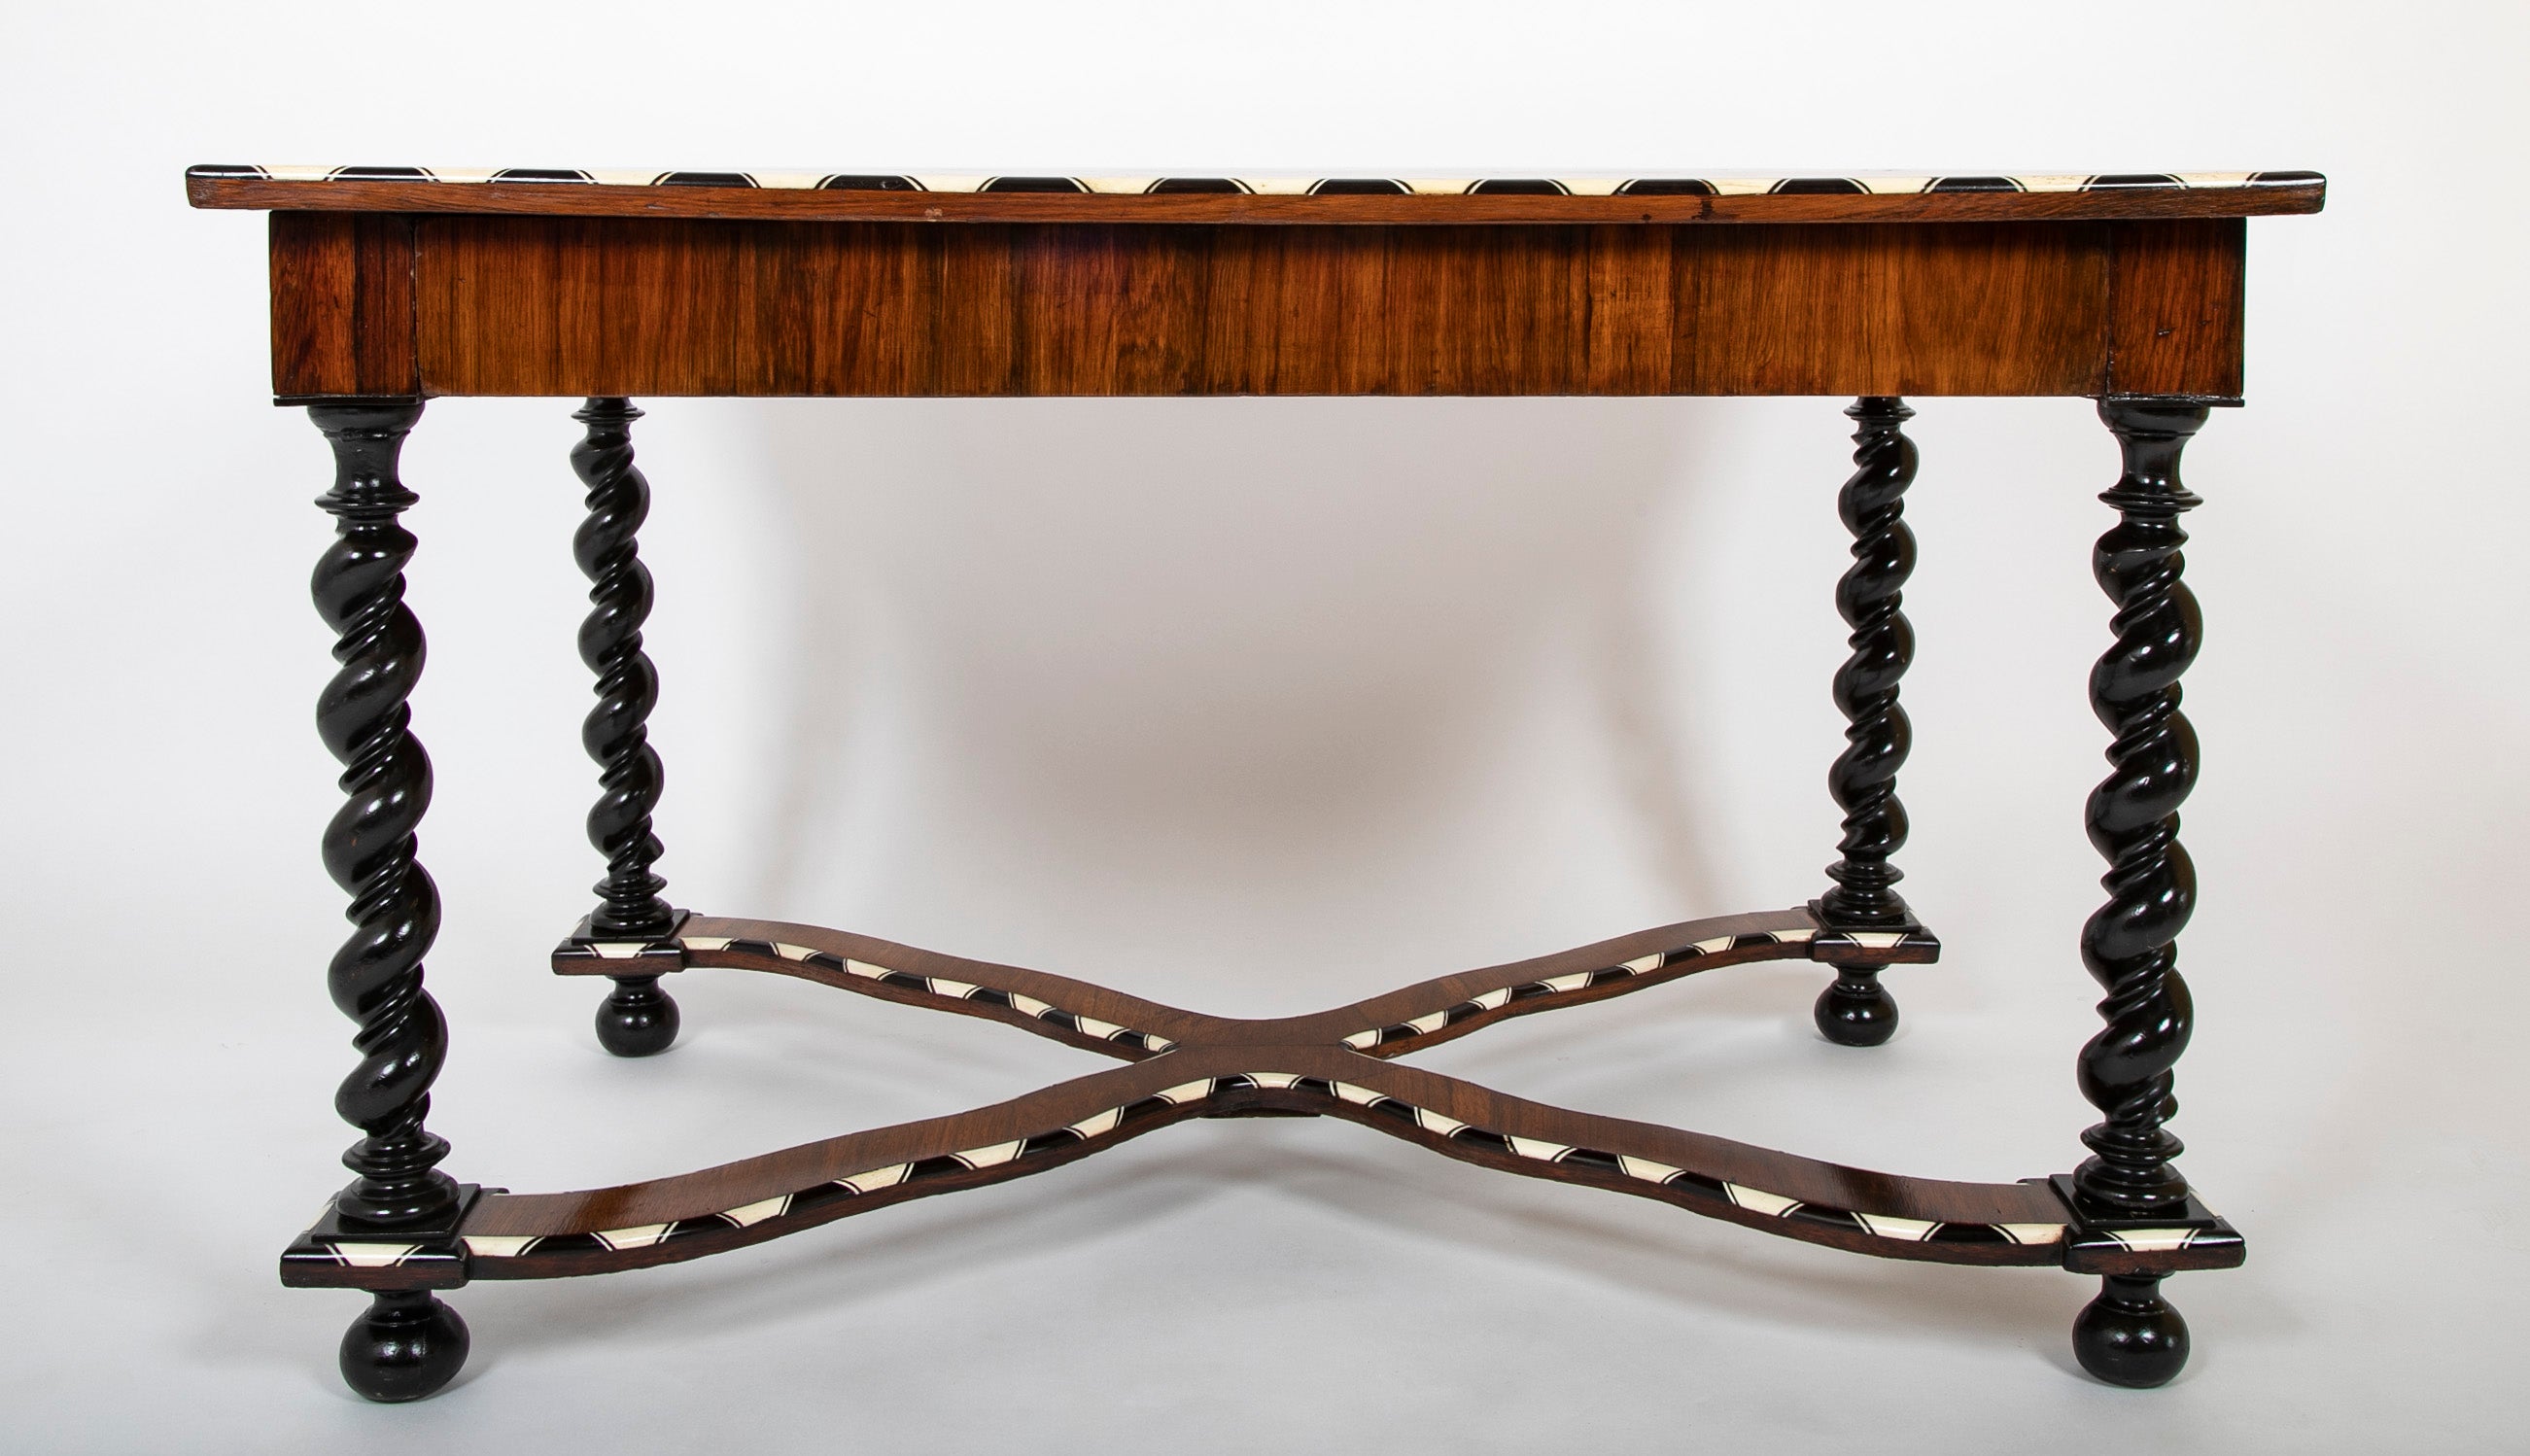 Baroque Renaissance Center Table in Italian Walnut with Marquetry Top